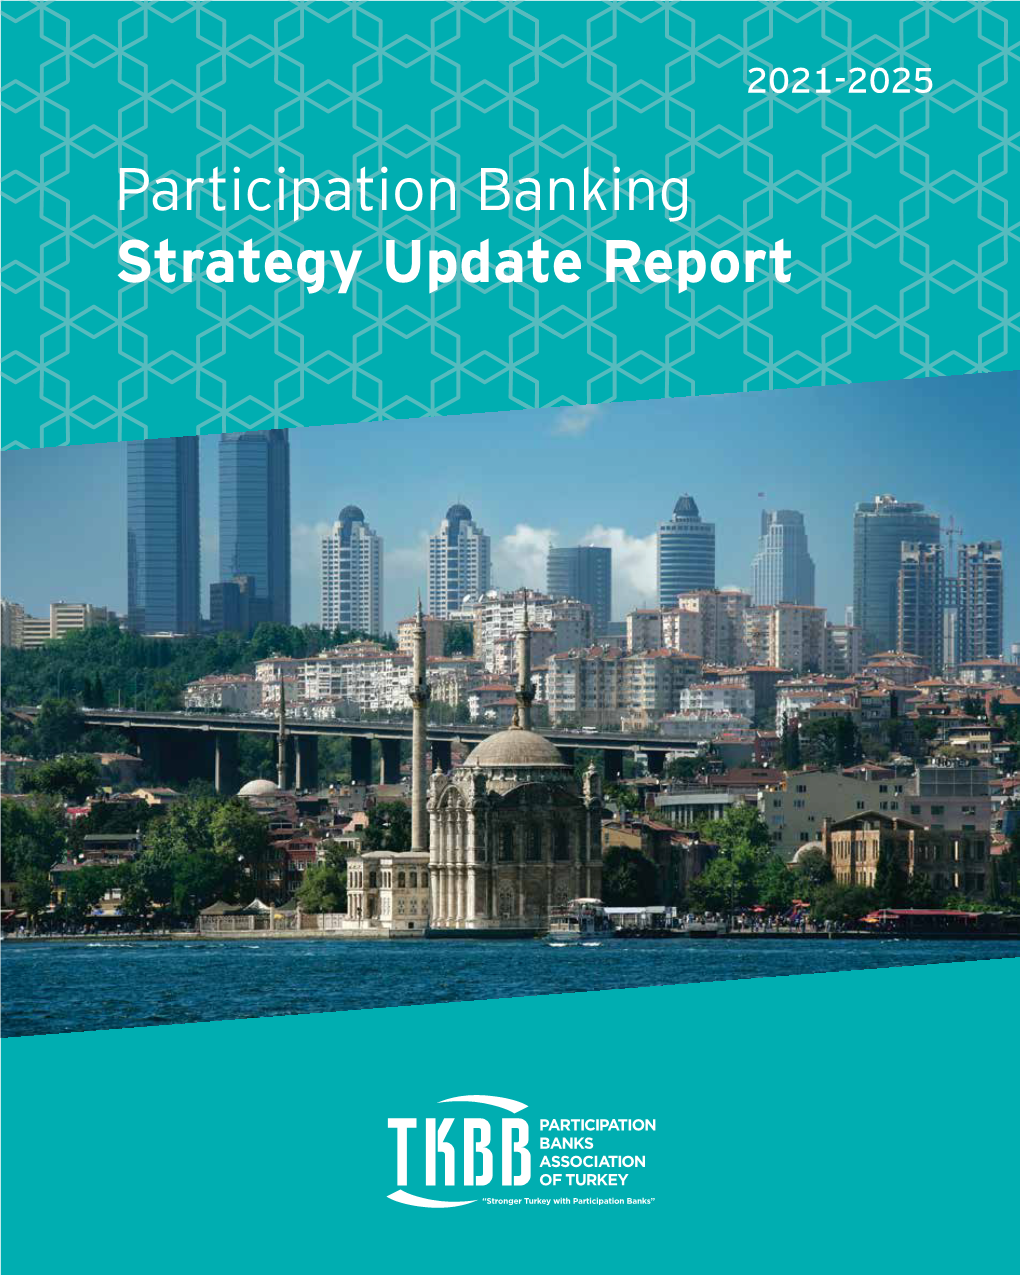 Participation Banking Strategy Update Report (2021-2025)